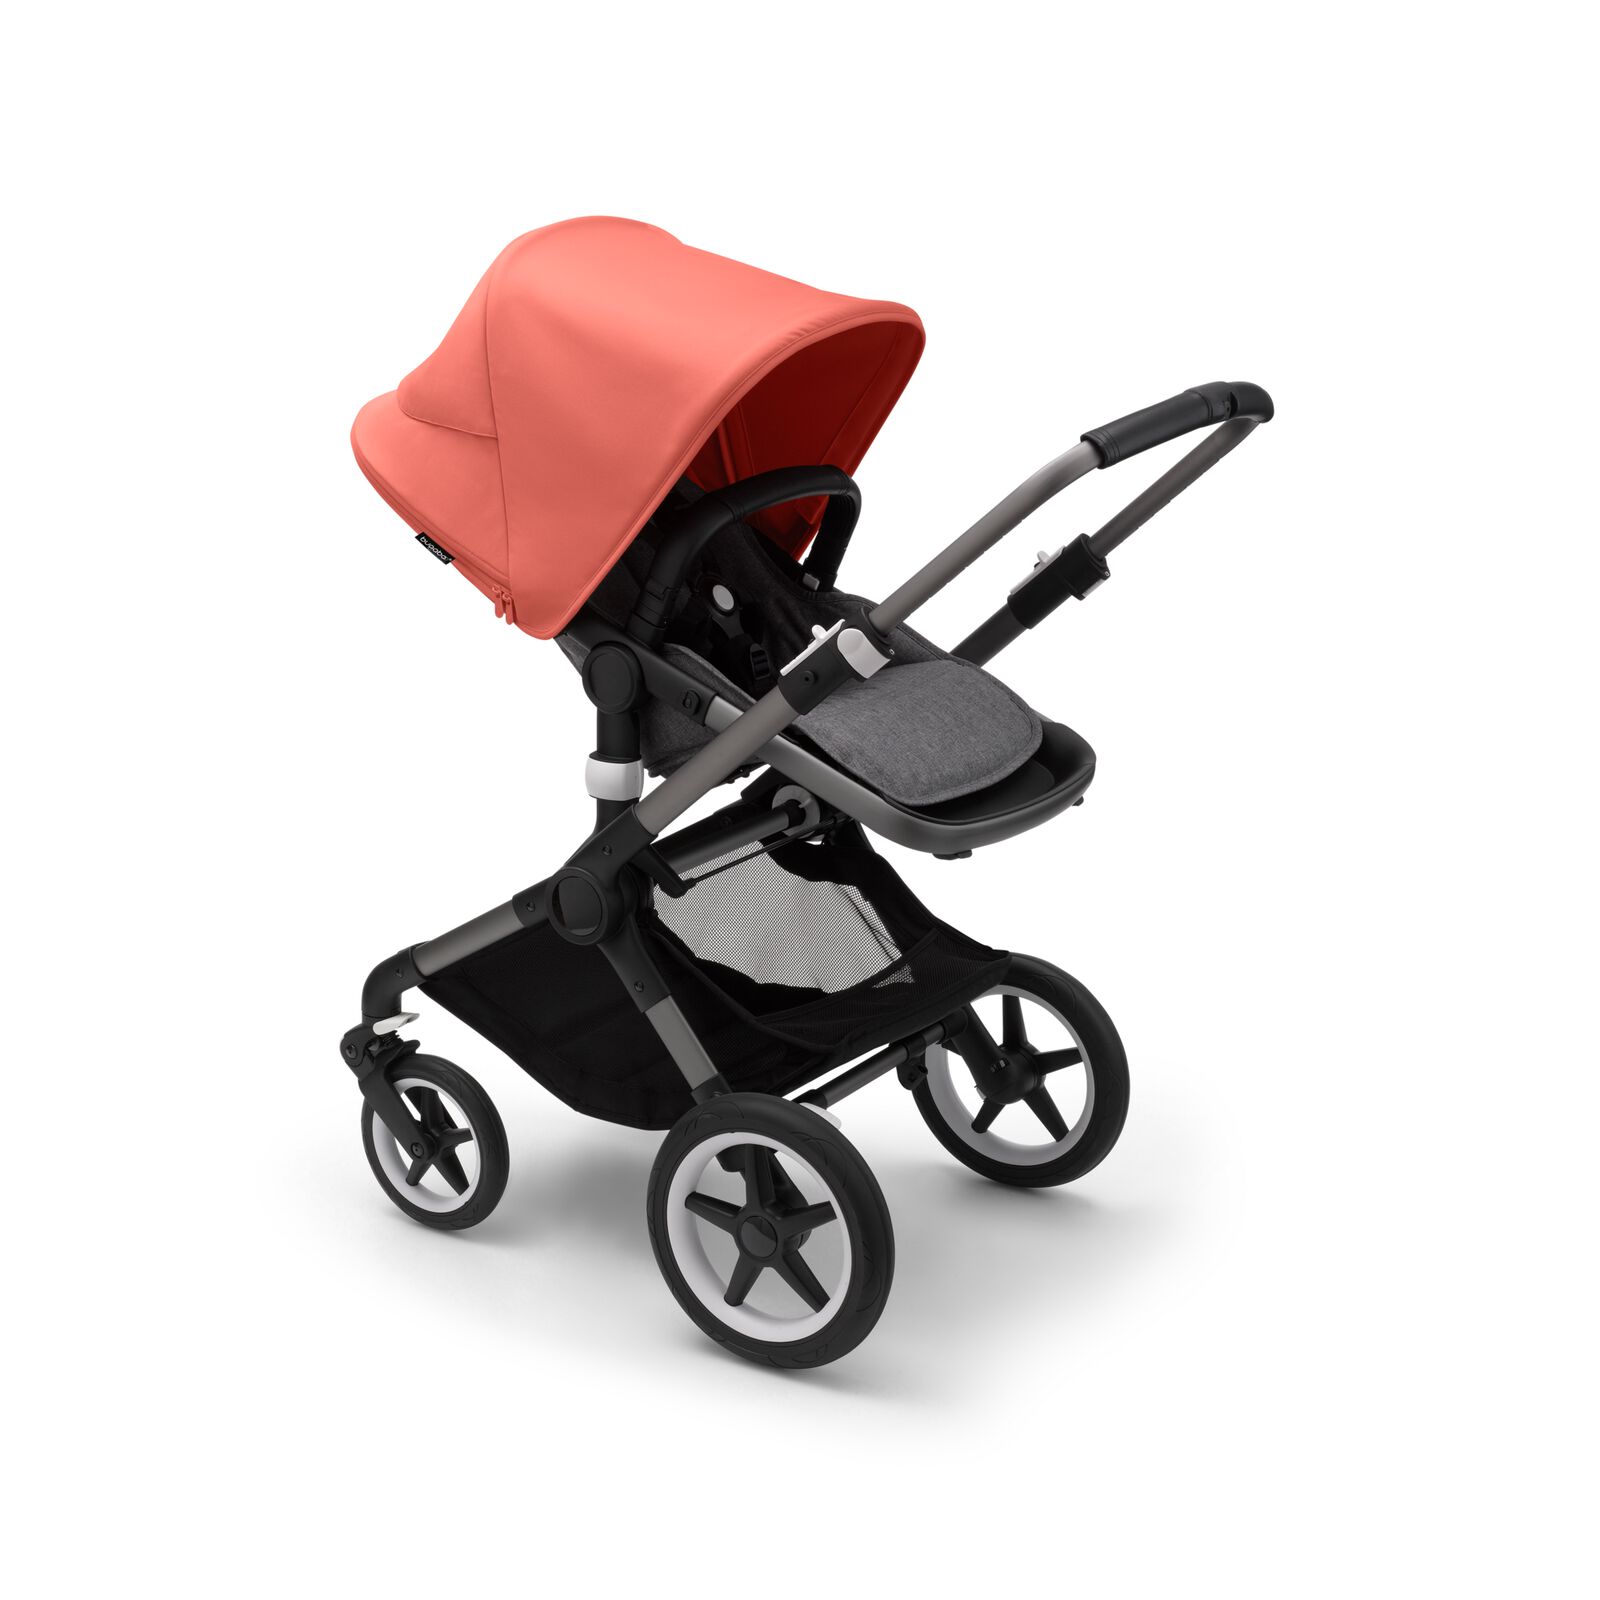 Bugaboo Fox 3 seat stroller with graphite frame, grey fabrics, and red sun canopy.